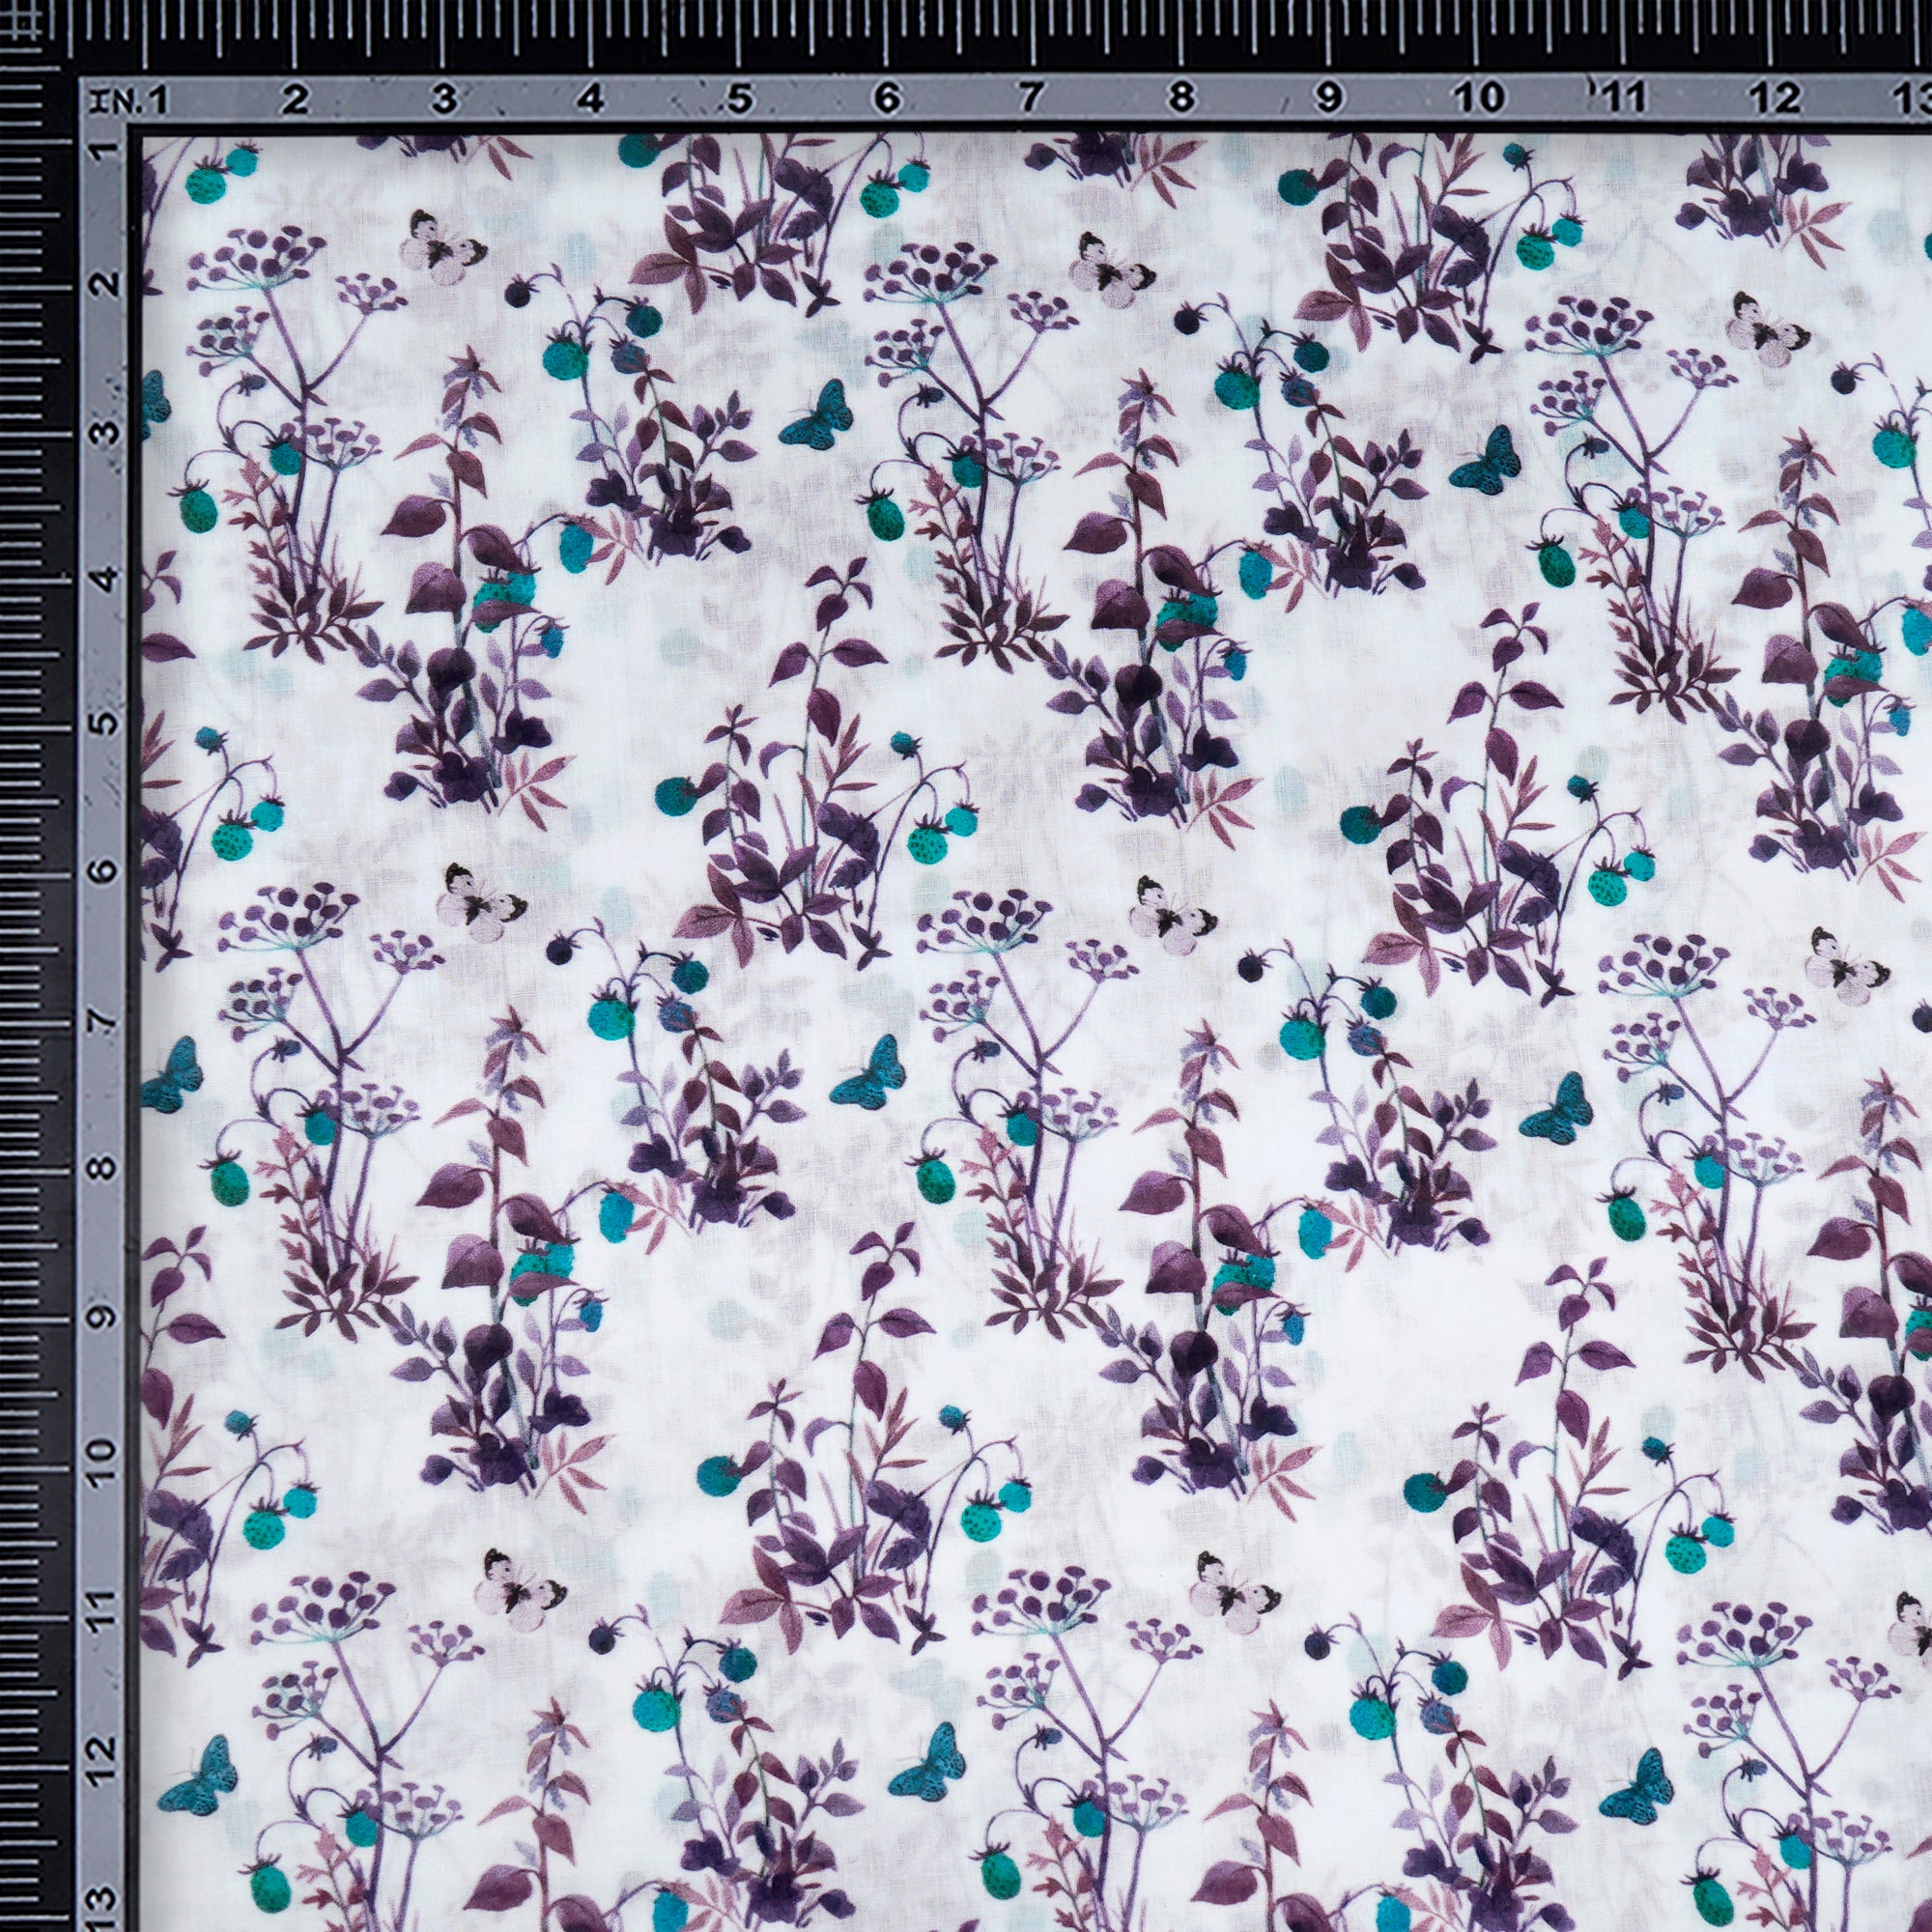 White Floreal Pattern Digital Print Voile Cotton Fabric